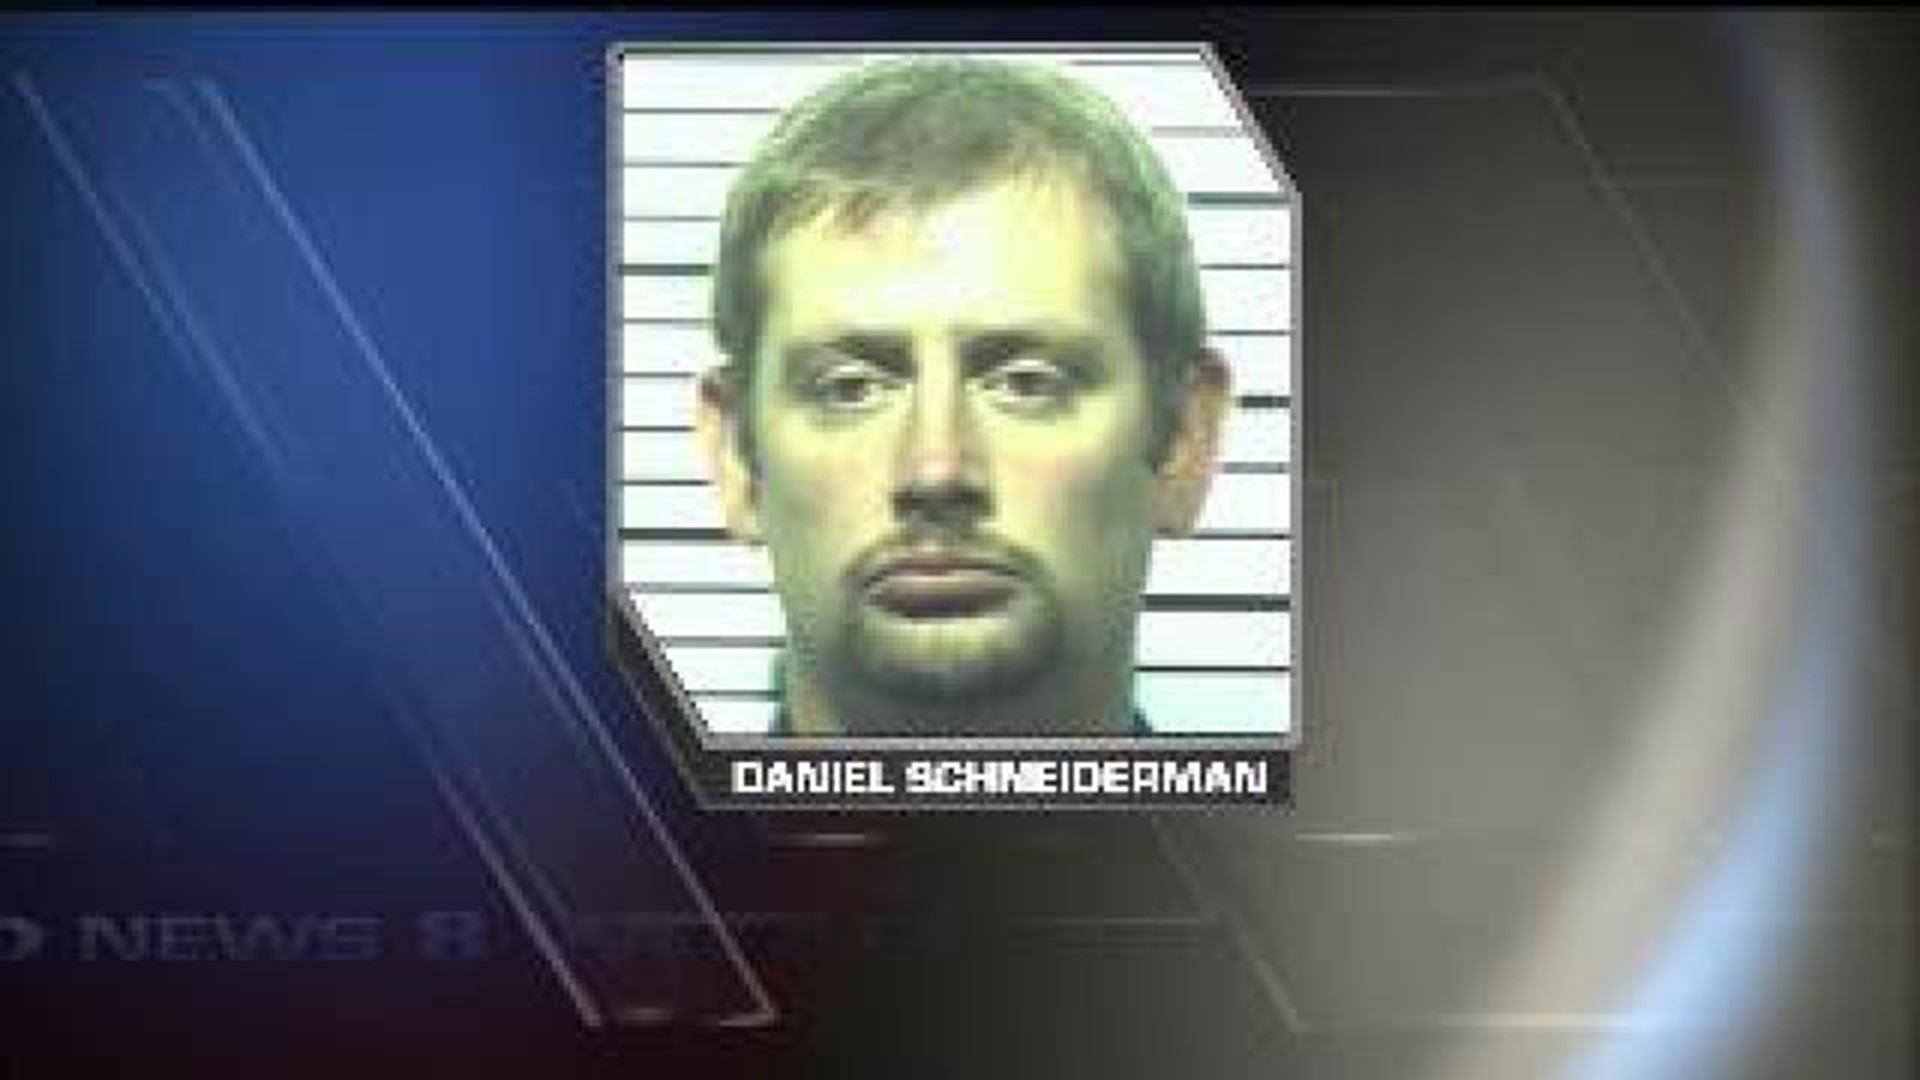 New charges brought against former coach